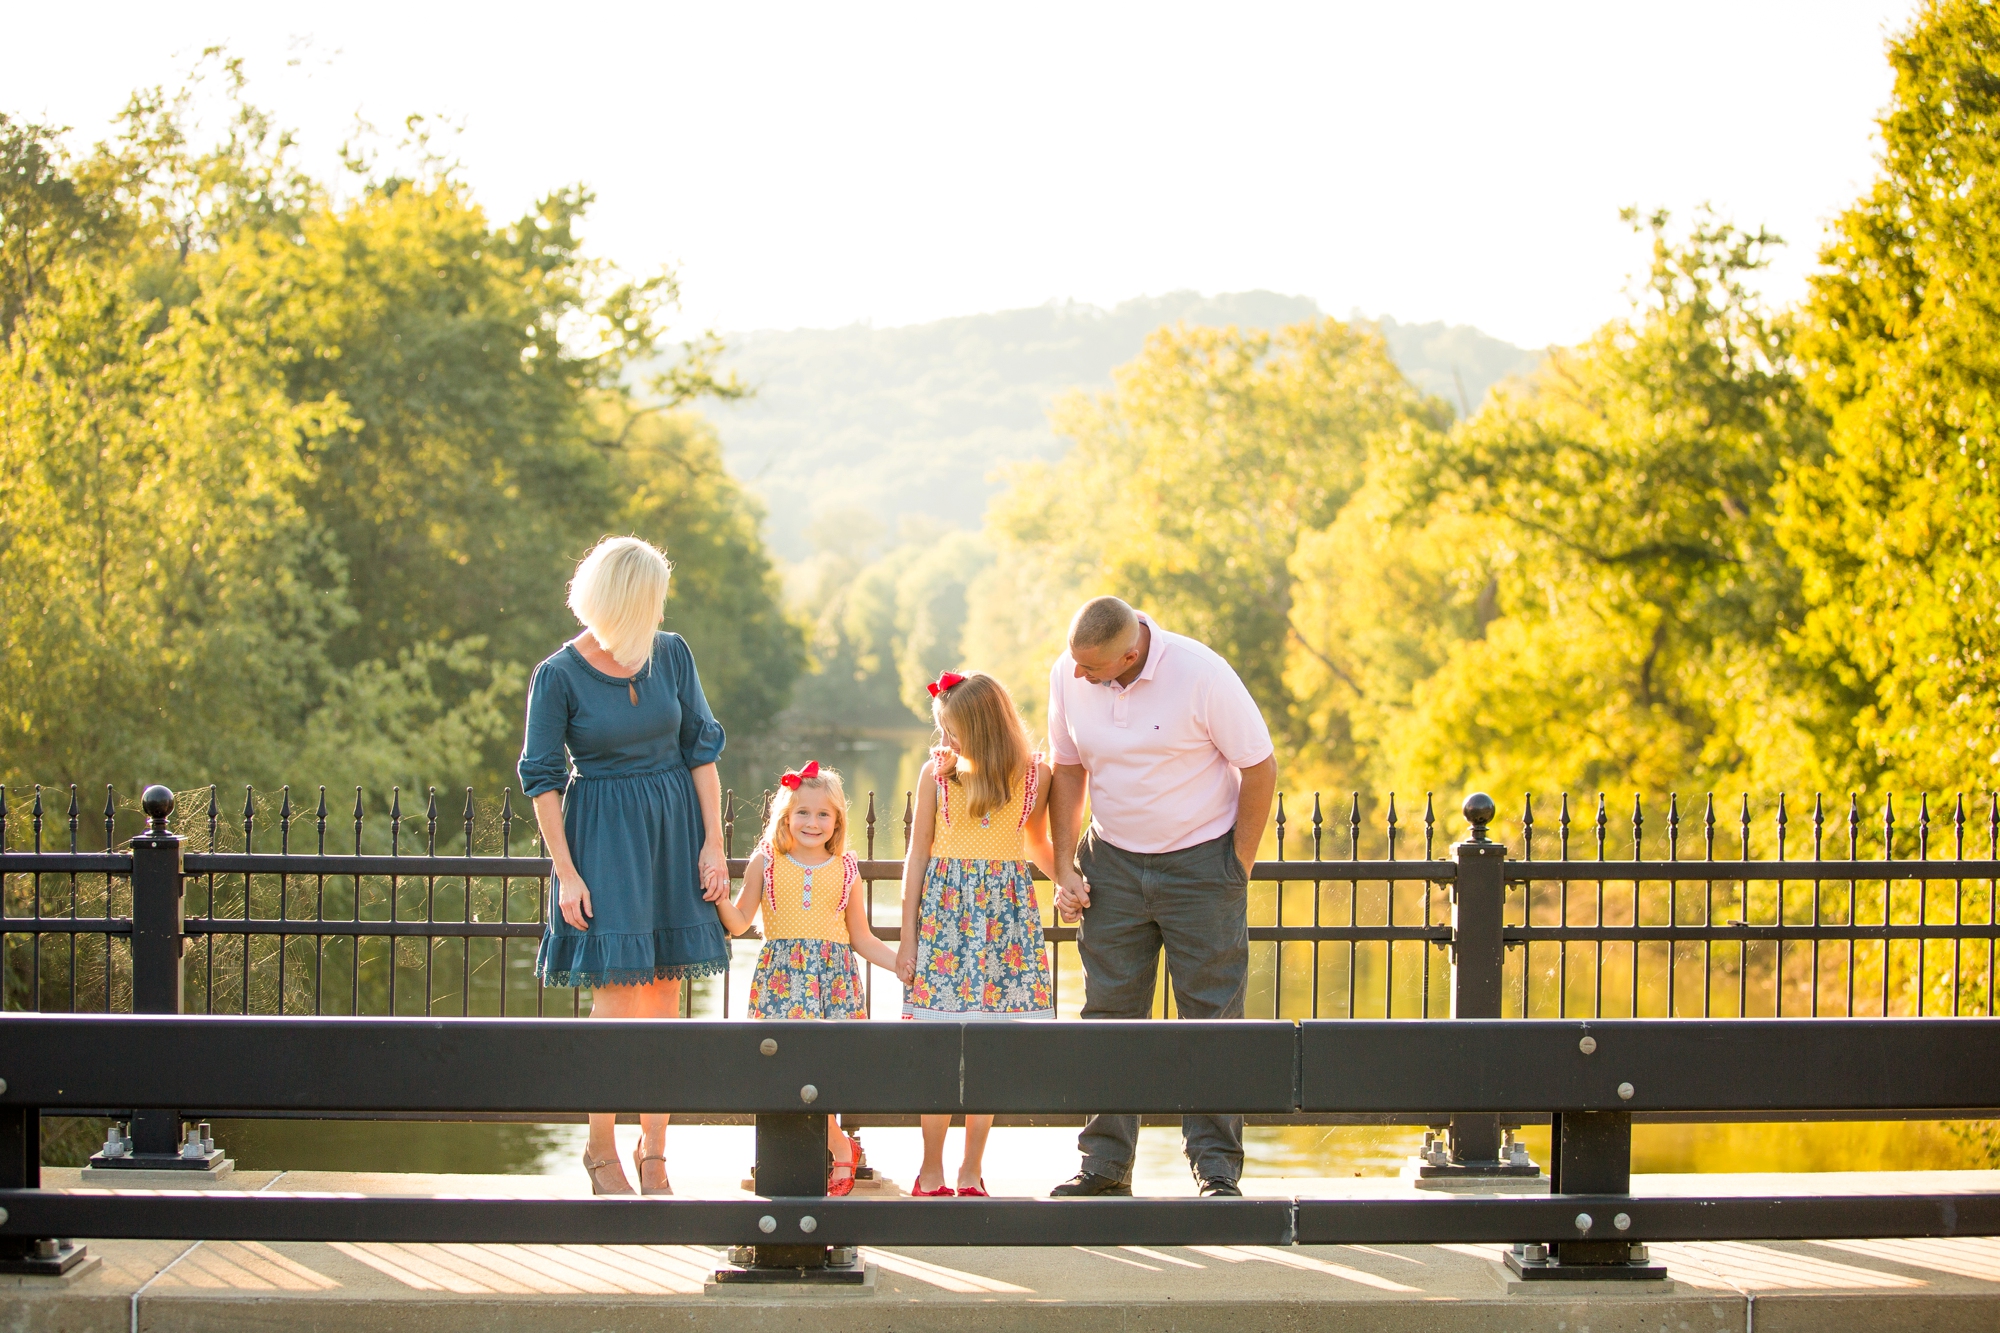 best places to take pictures in pittsburgh, cool places to take pictures in pittsburgh, mcconnells mill state park, pittsburgh family photographer, cranberry township family photographer